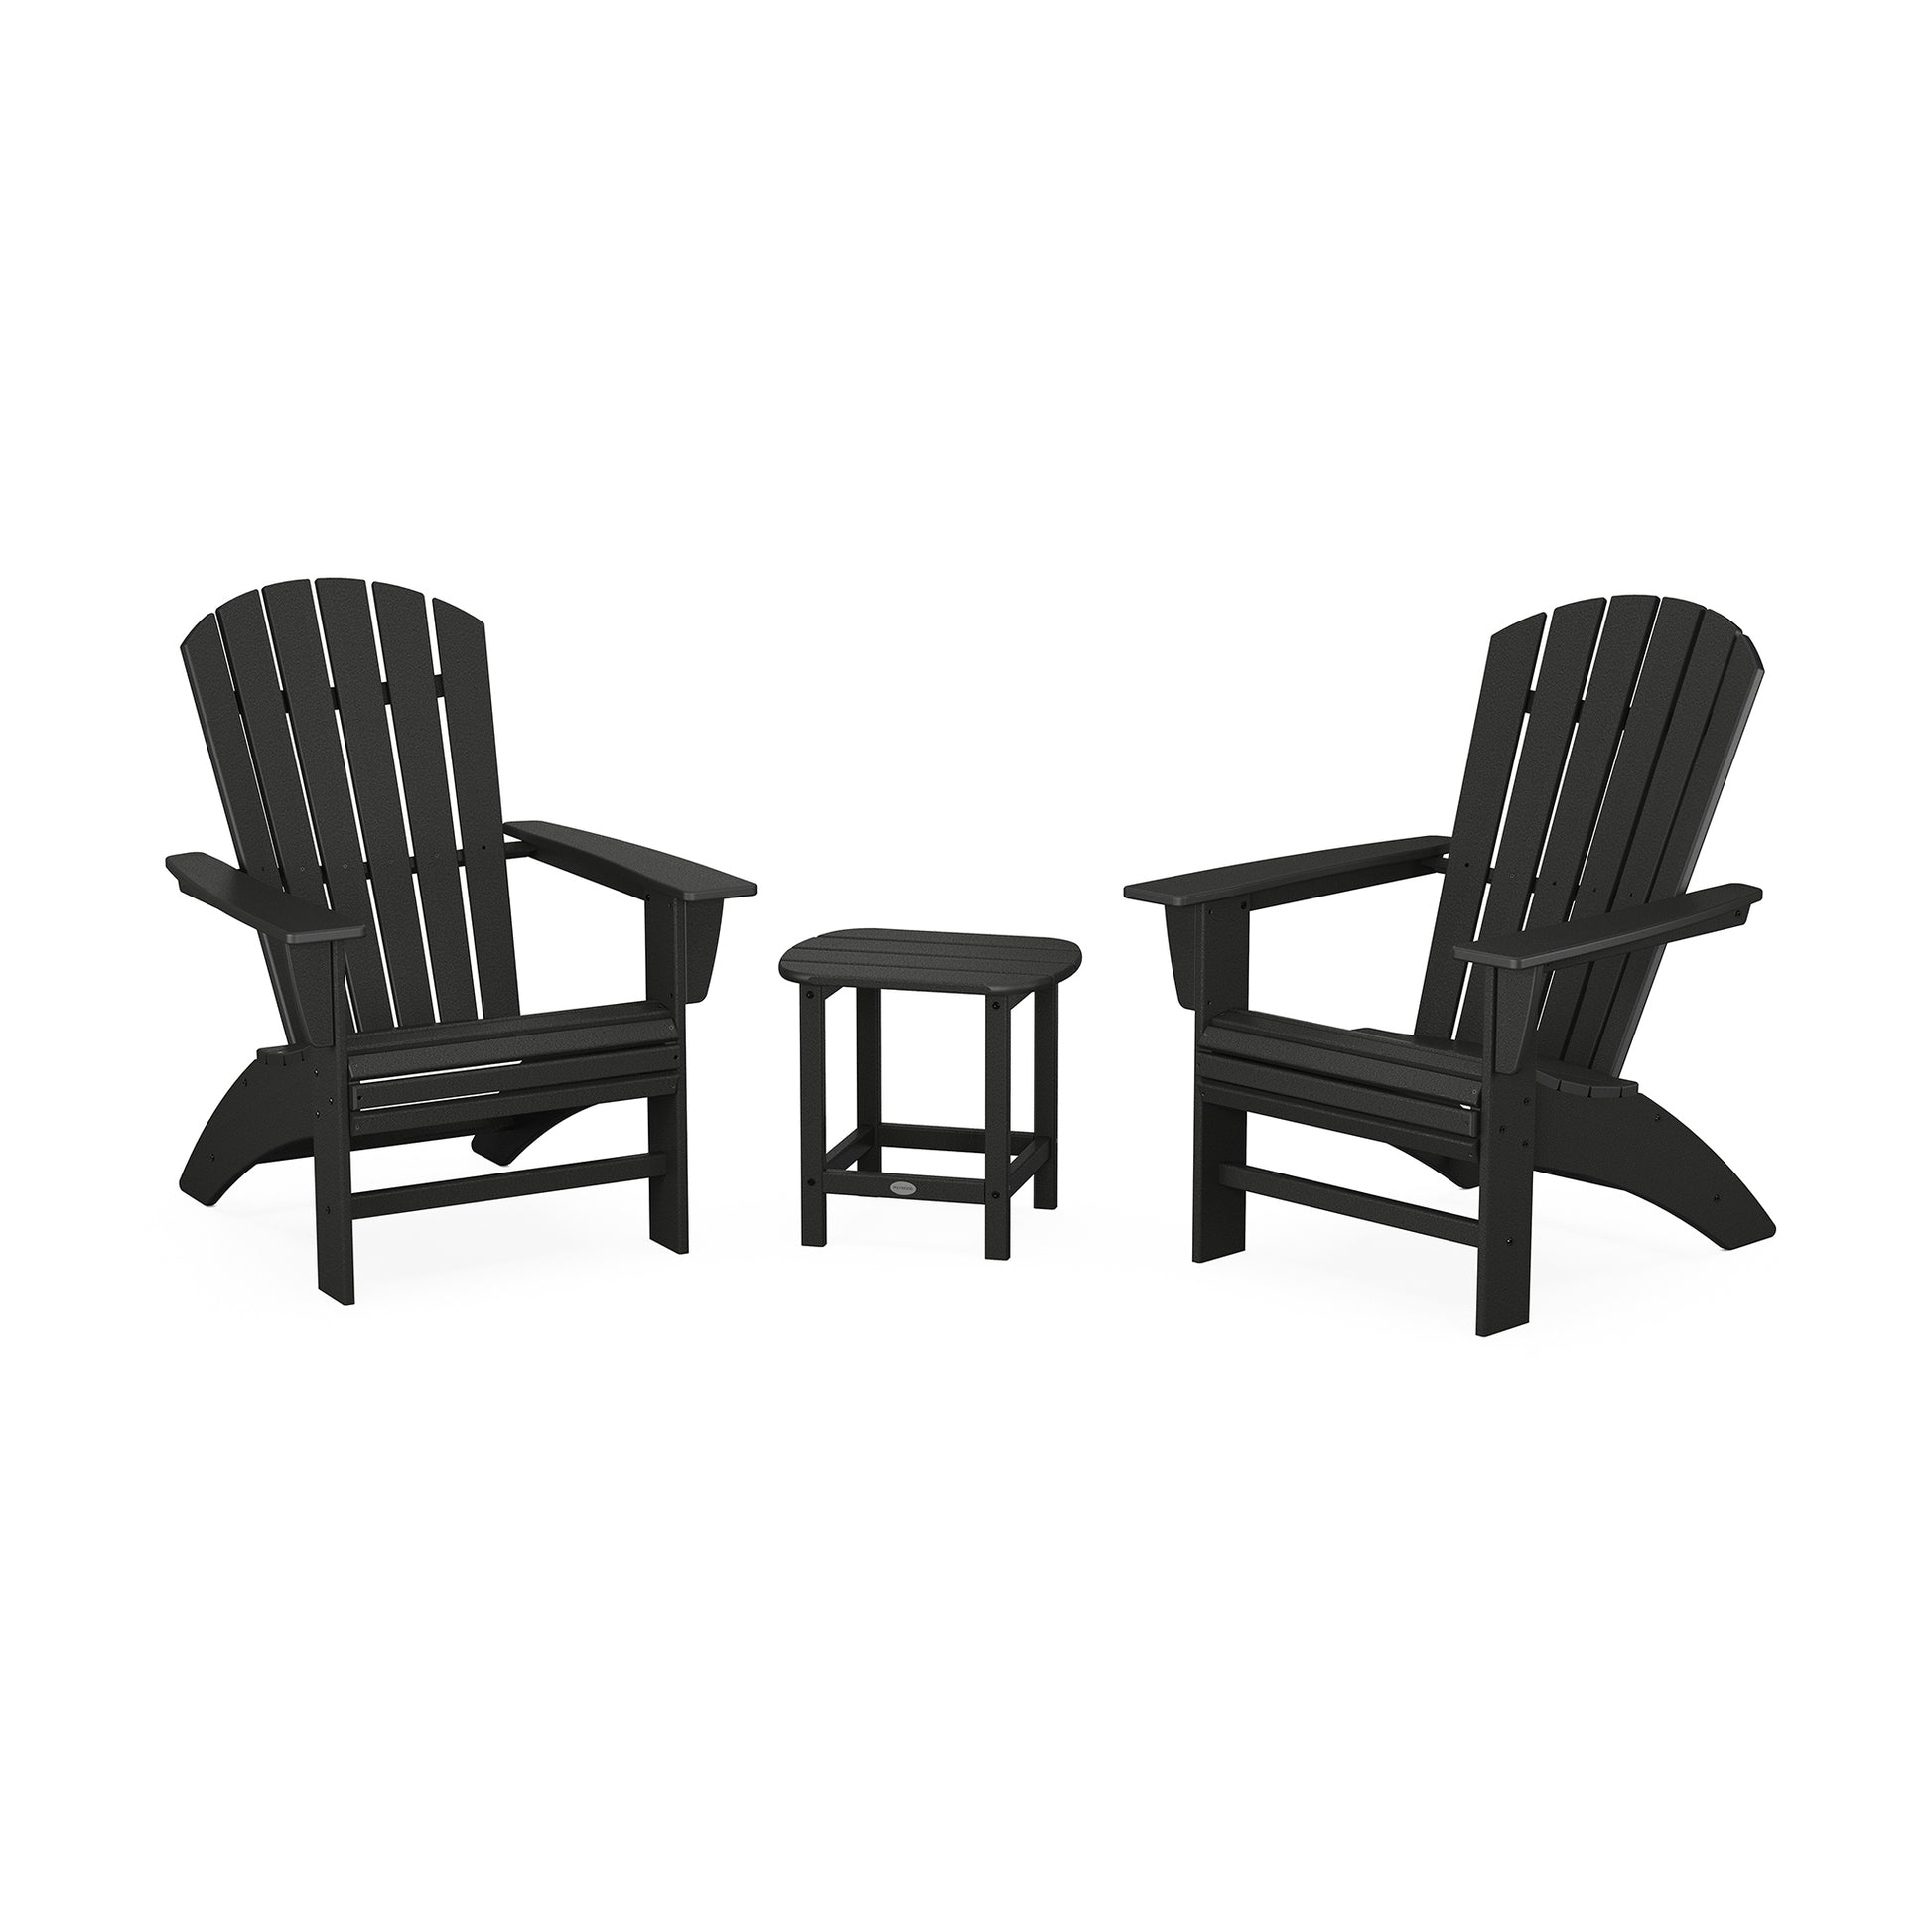 Two black POLYWOOD Nautical 3-Piece Curveback Adirondack Sets with a matching small side table, set on a plain white background. The chairs are designed with vertical slats and wide armrests.